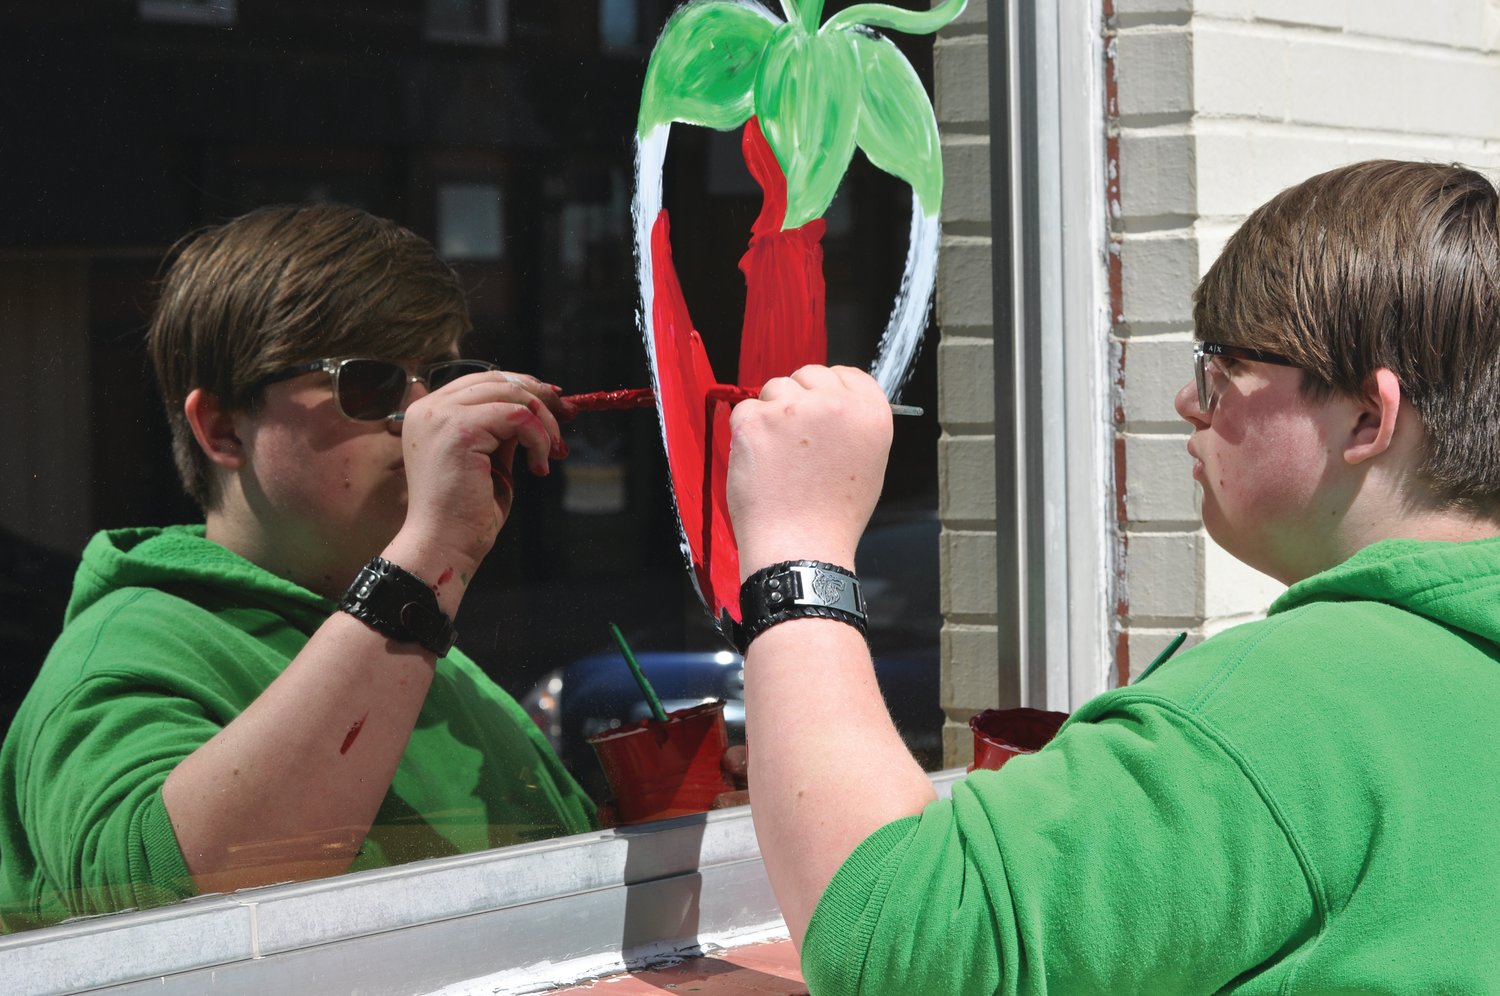 Carsen McCoy paints a strawberry on the Weemickle Building in downtown Crawfordsville Saturday. The yearly tradition promotes the Strawberry Festival, which runs from June 11-13 on the grounds of the Lane Place.